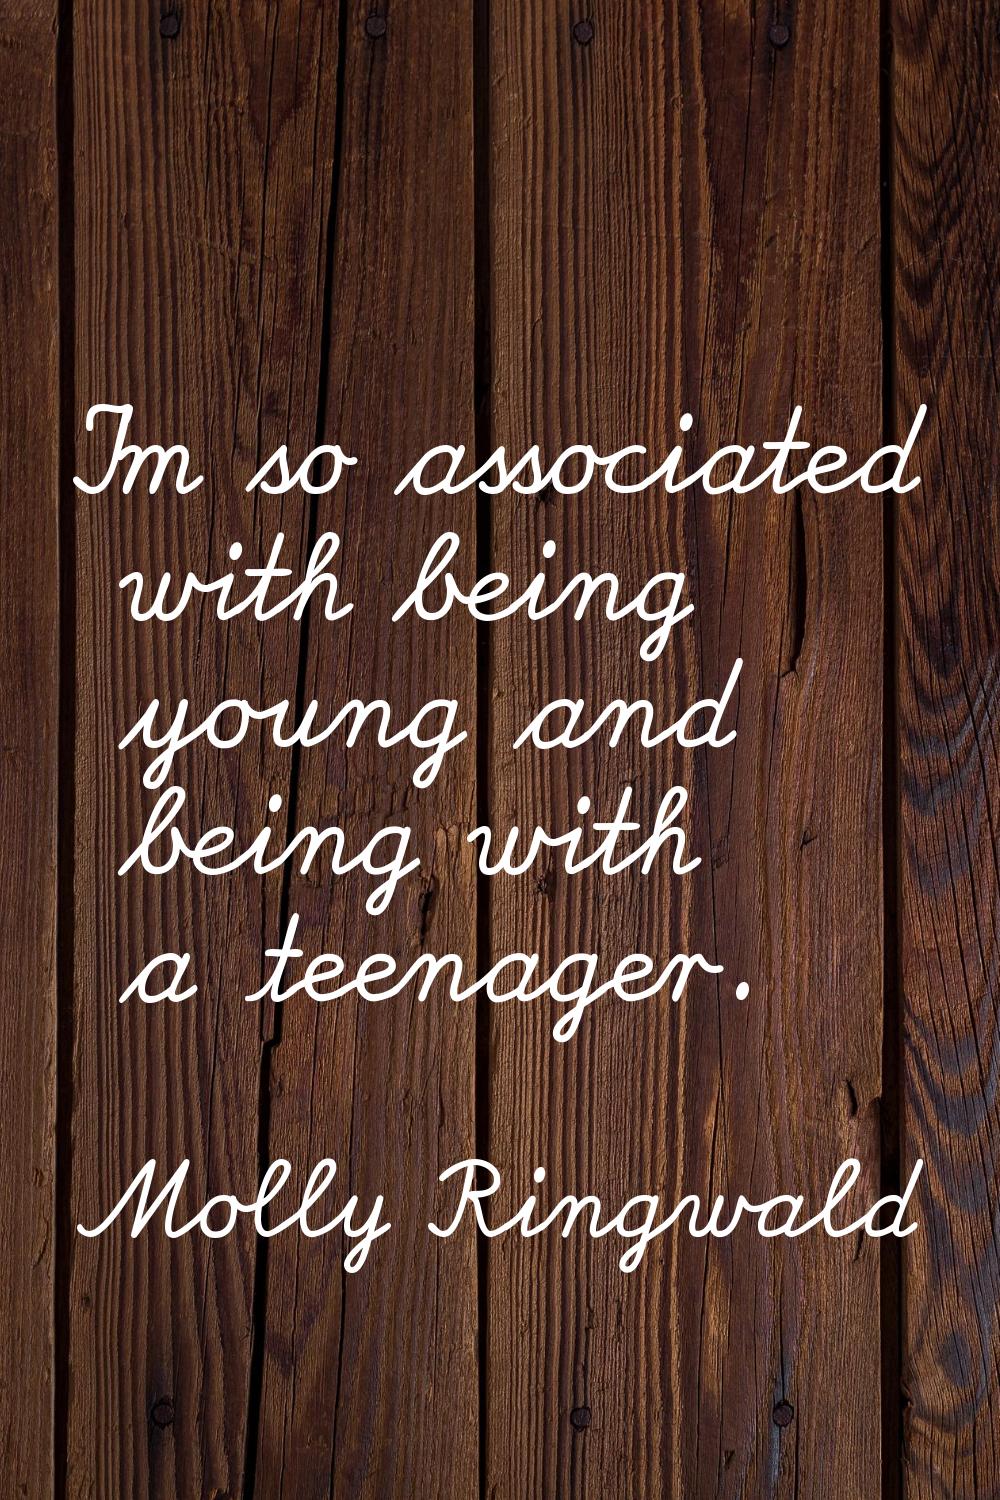 I'm so associated with being young and being with a teenager.